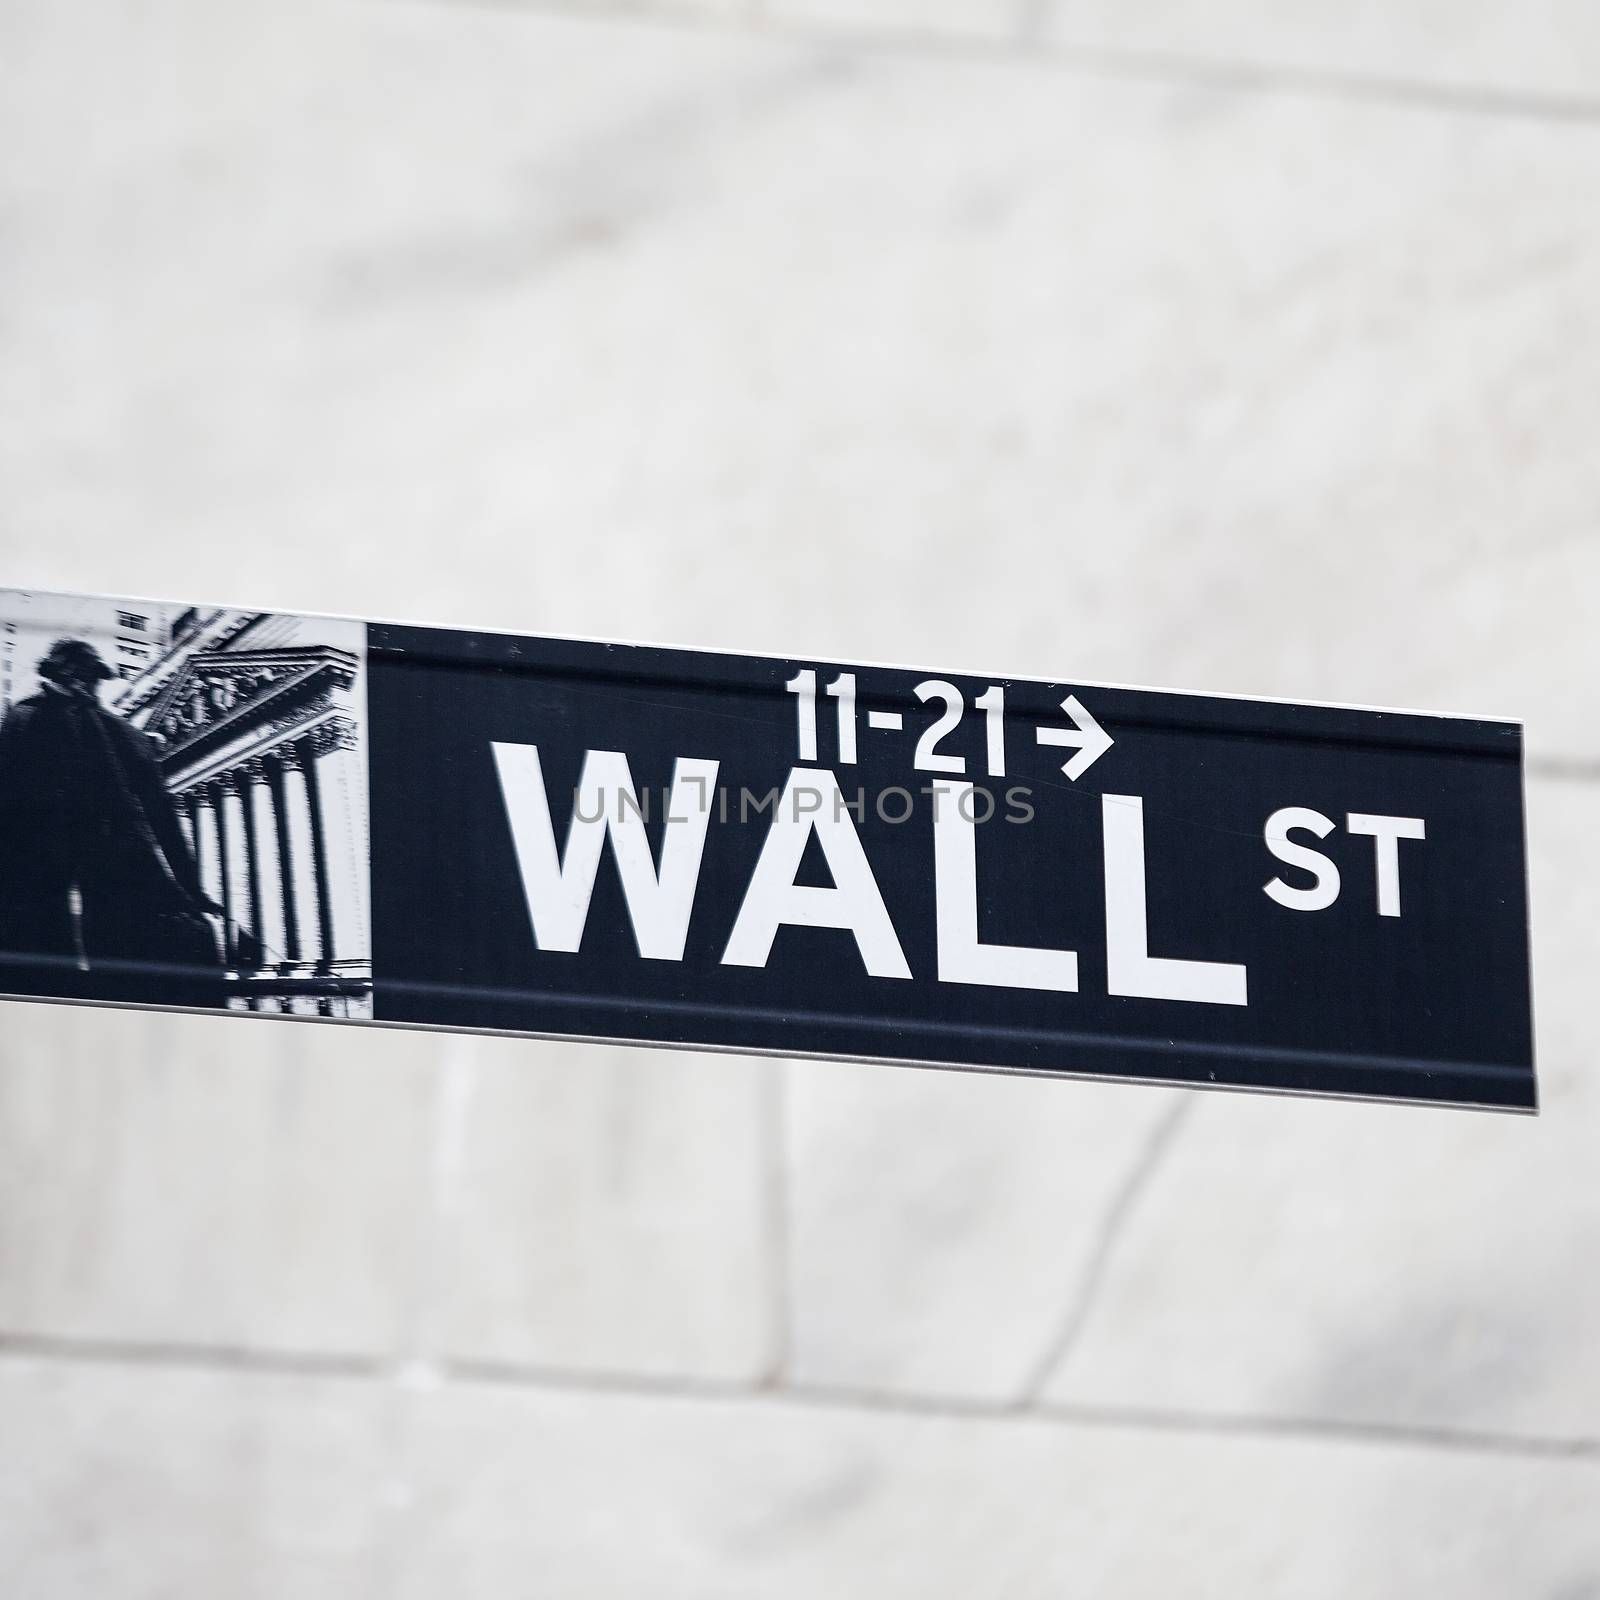 Wall street sign by vwalakte